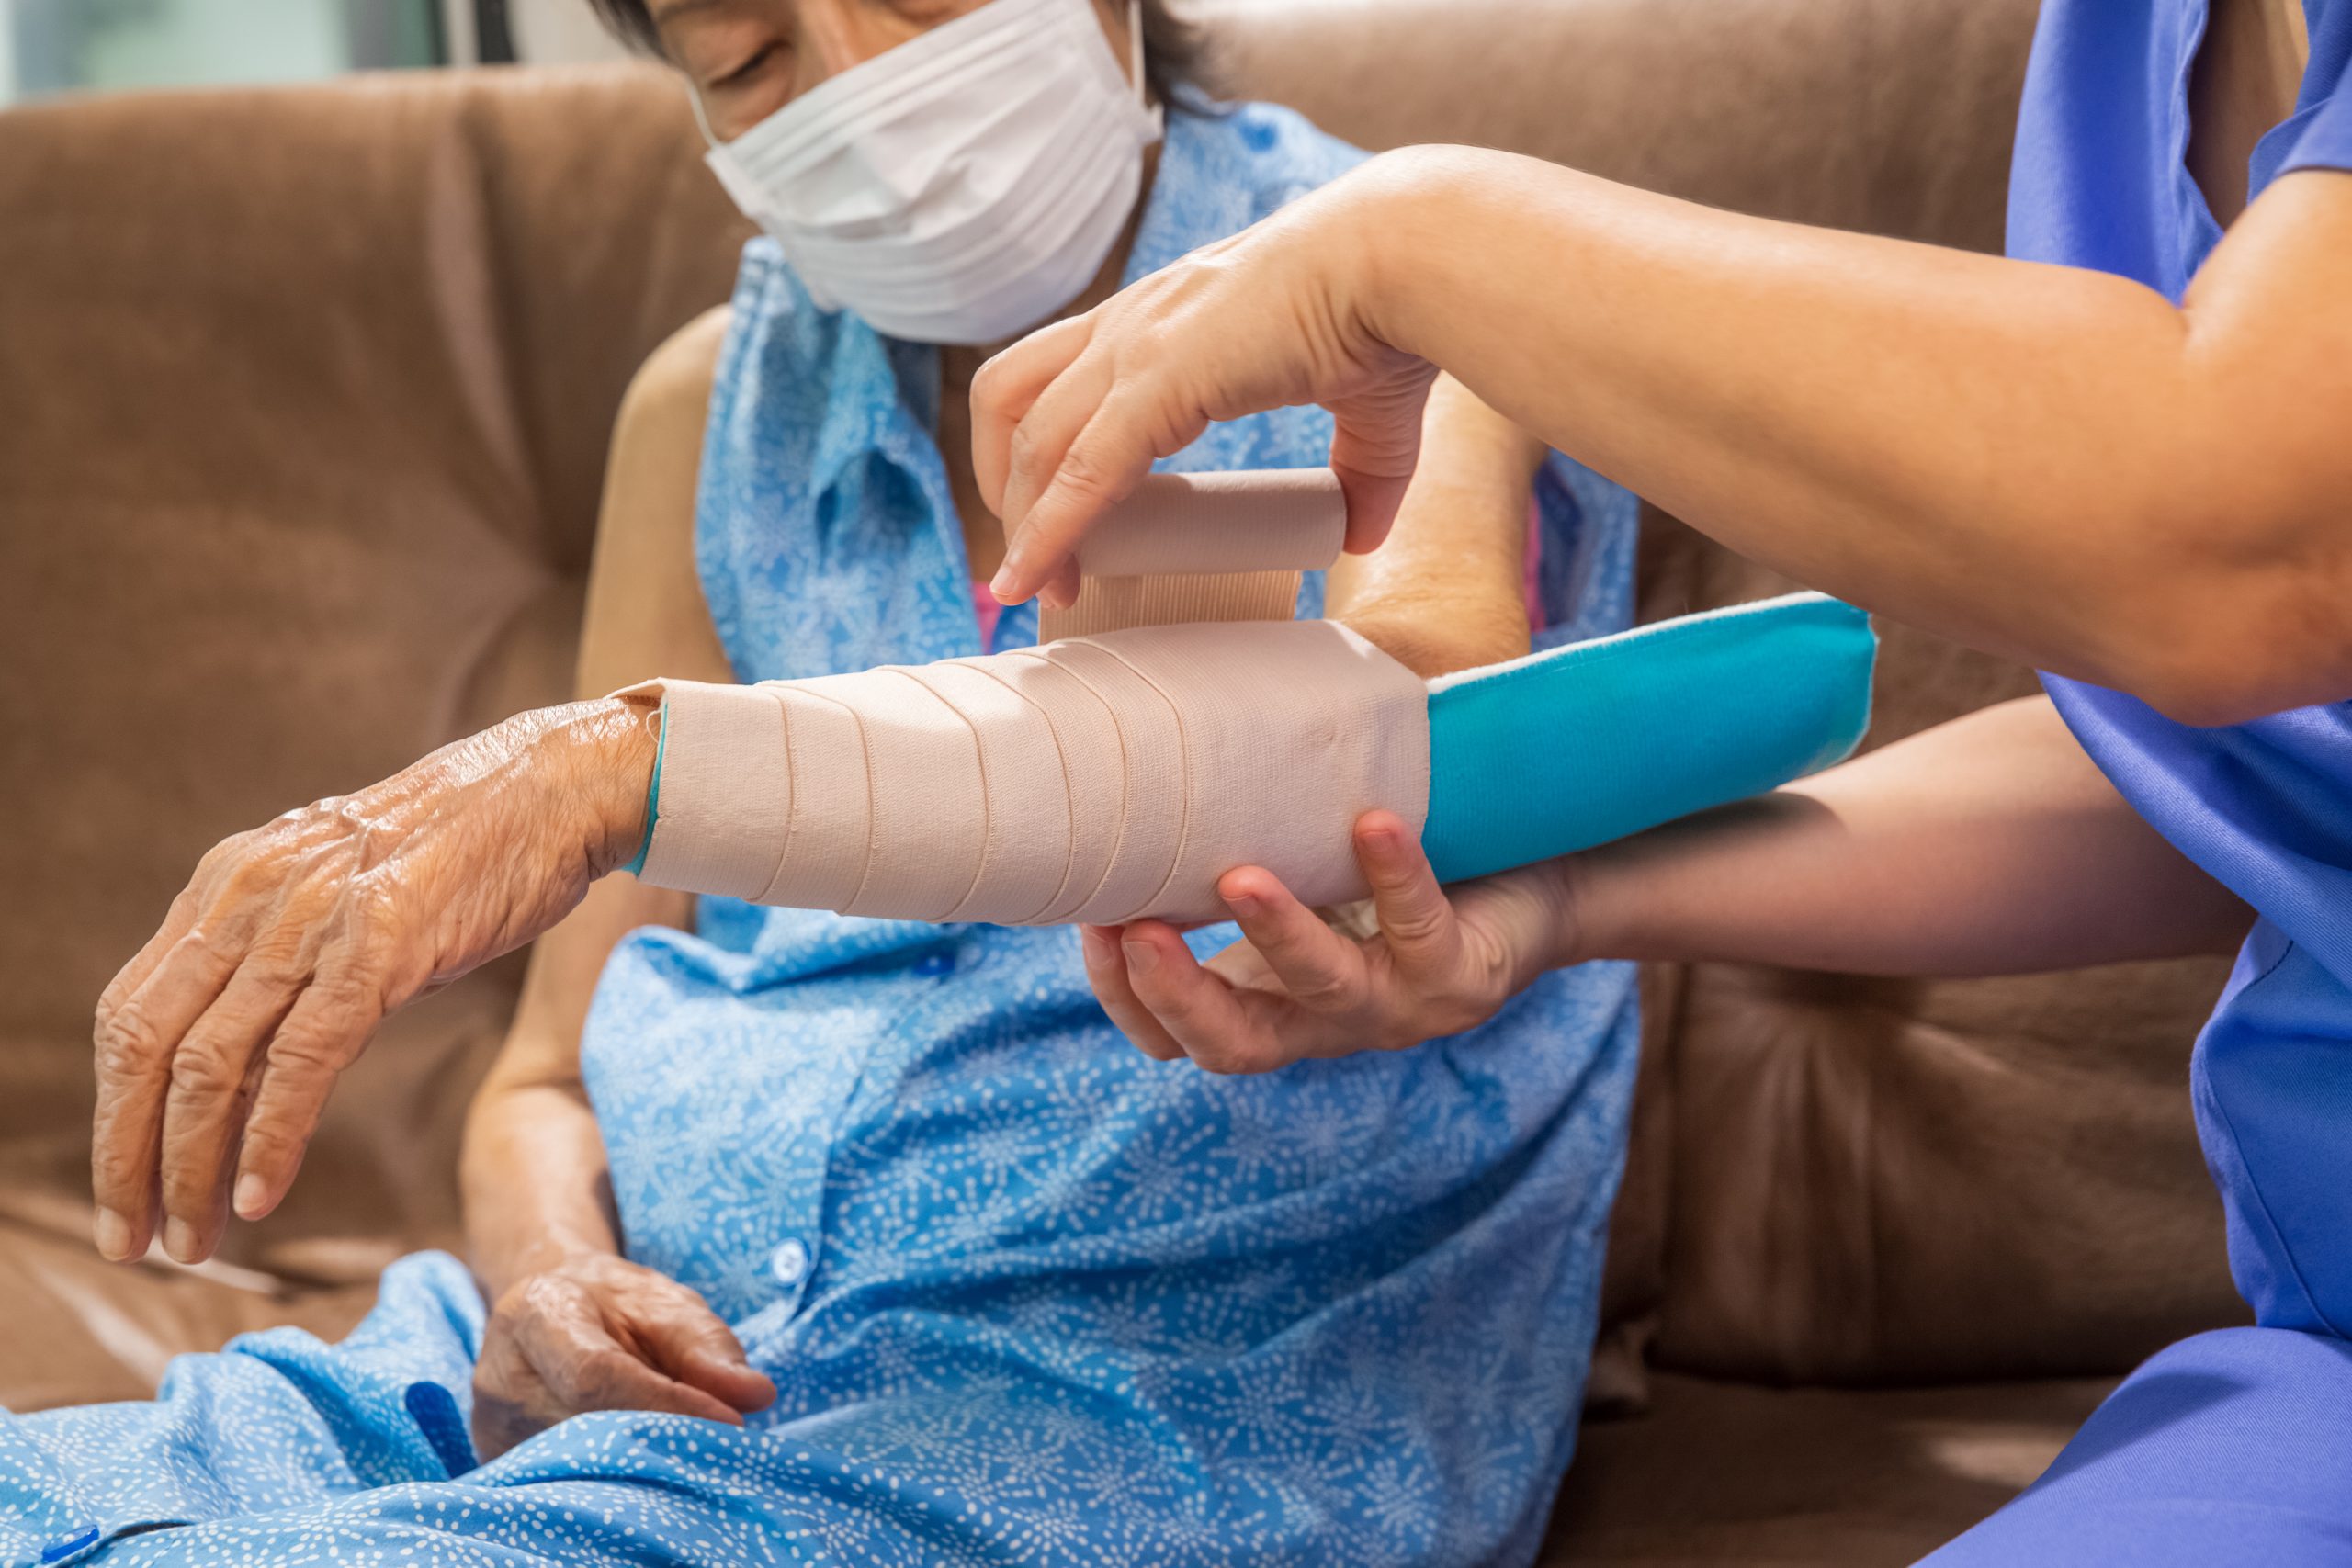 When is an elbow splint needed for a patient?